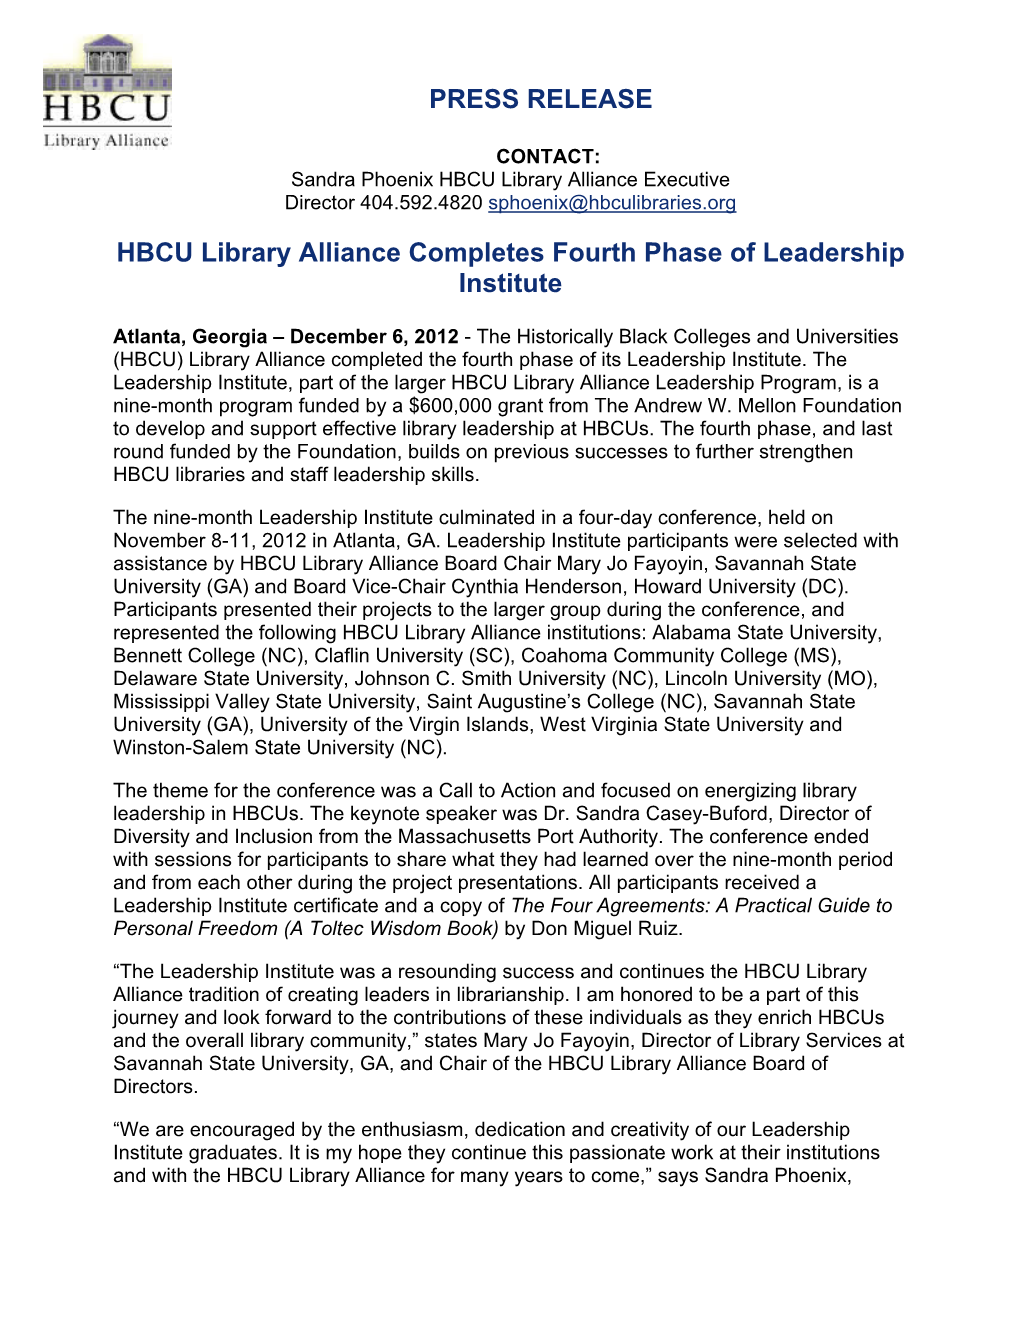 HBCU Library Alliance Completes Fourth Phase of Leadership Institute